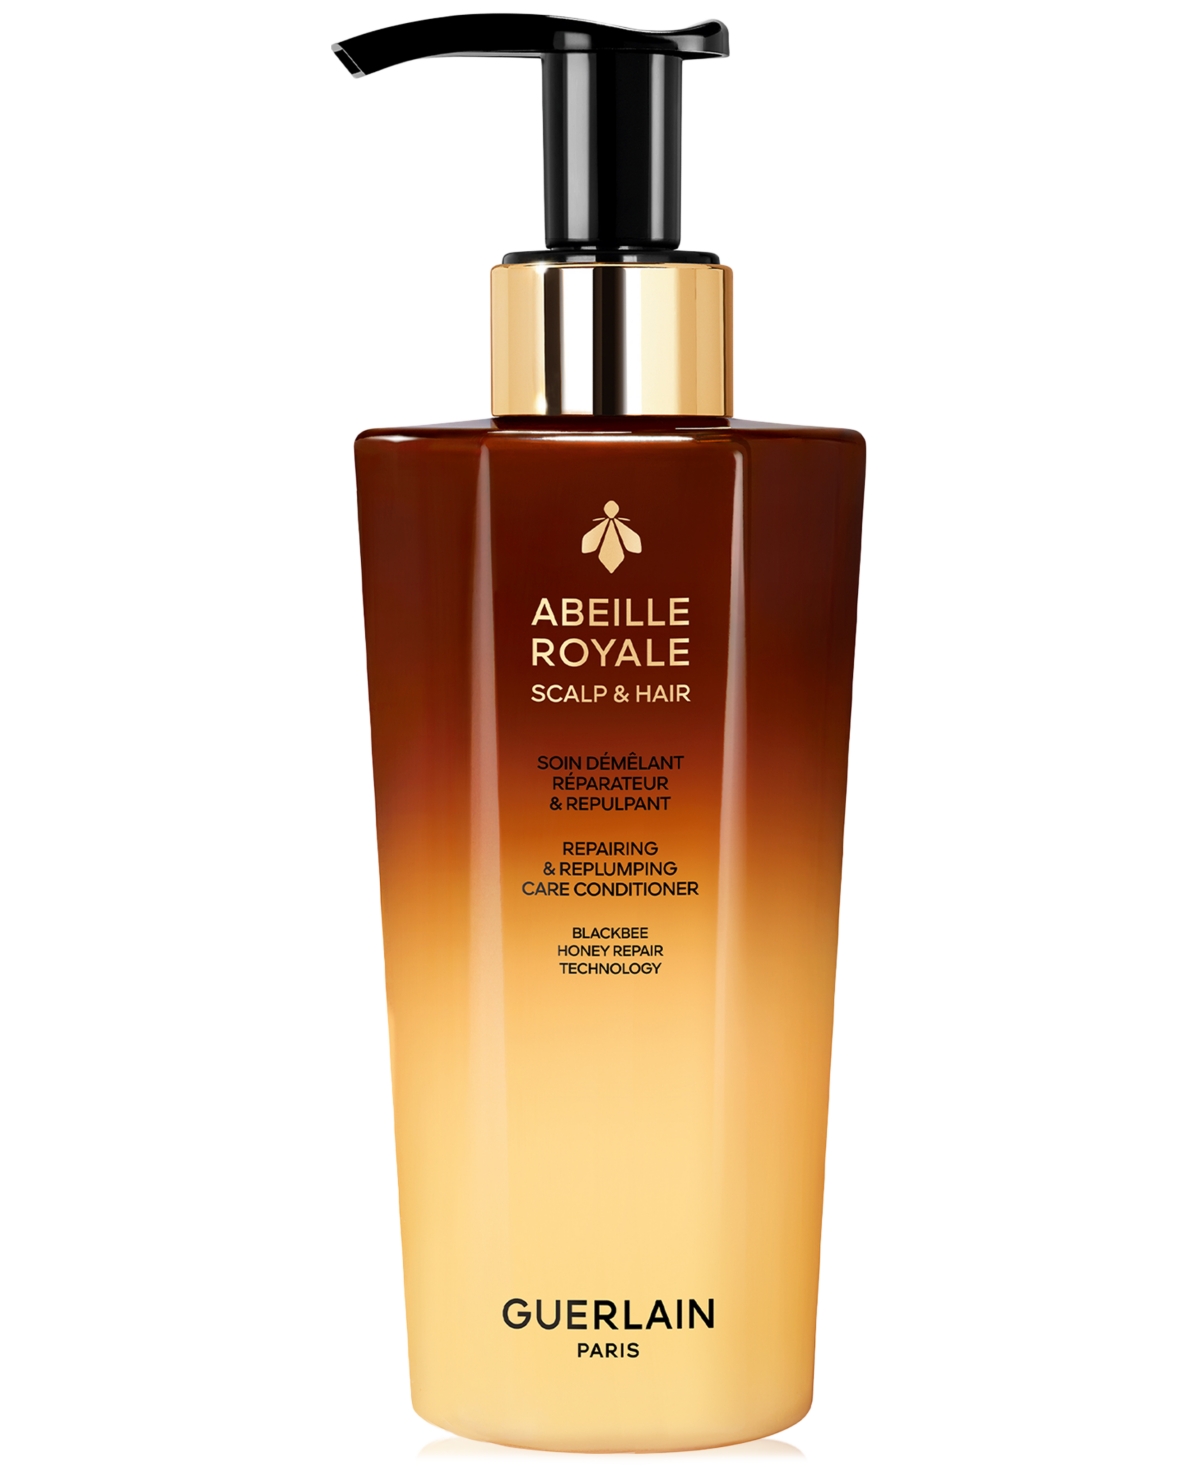 Abeille Royale Scalp & Hair Repairing & Replumping Care Conditioner - N/a